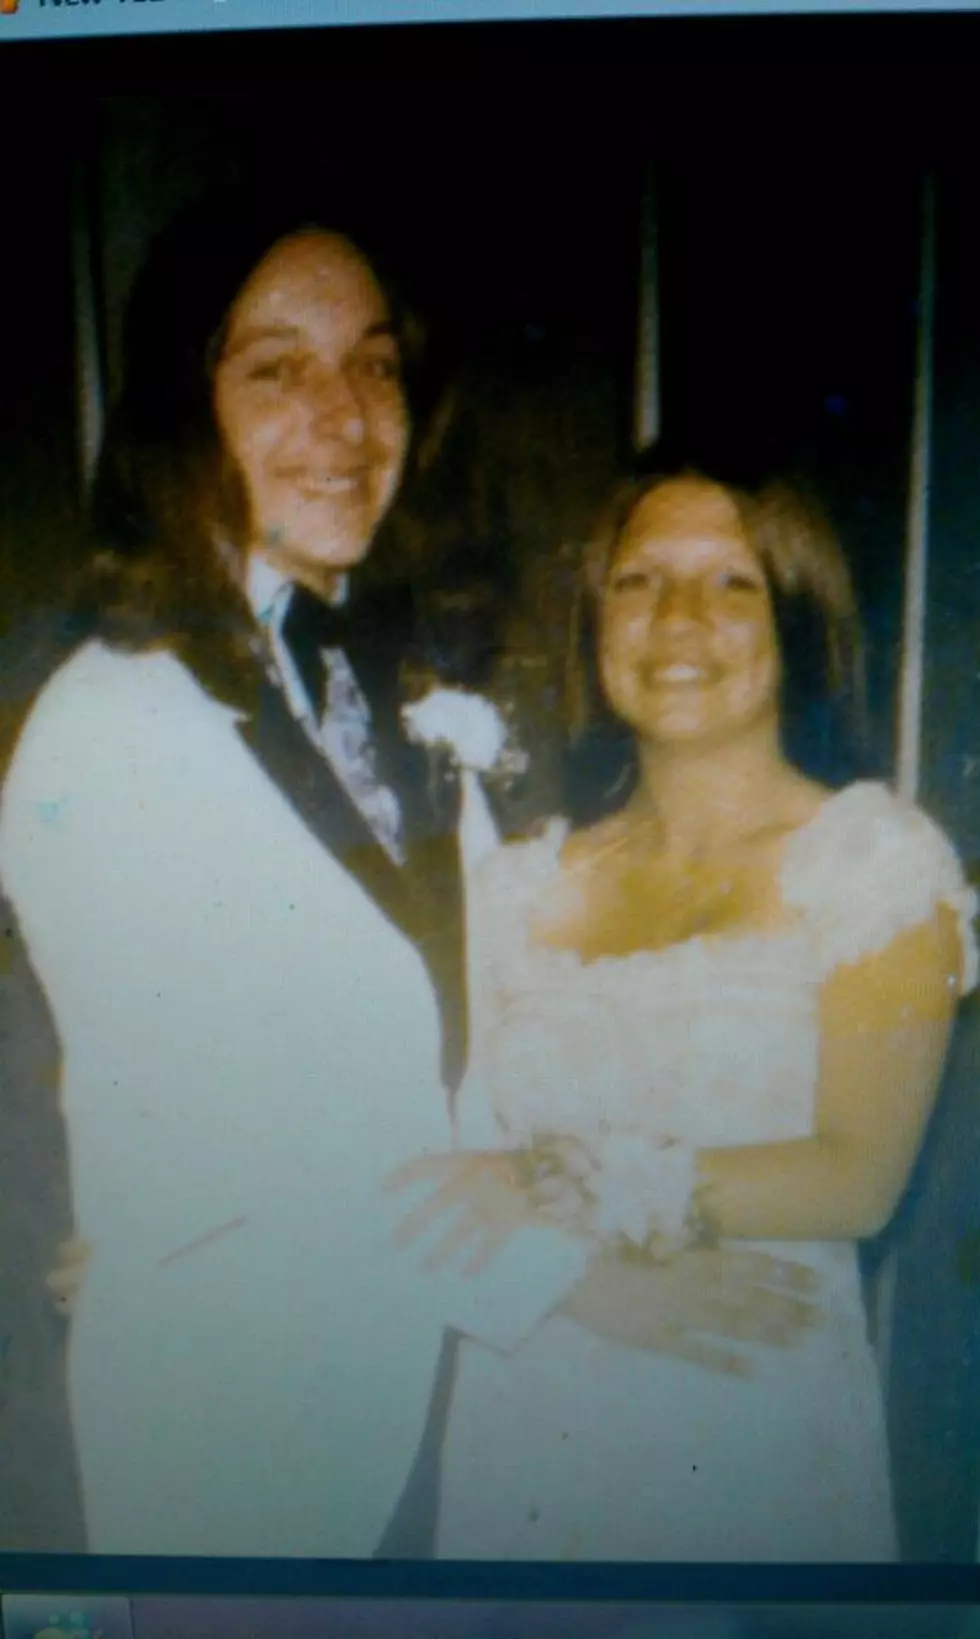 Throwback Picture: Marianne at the Prom